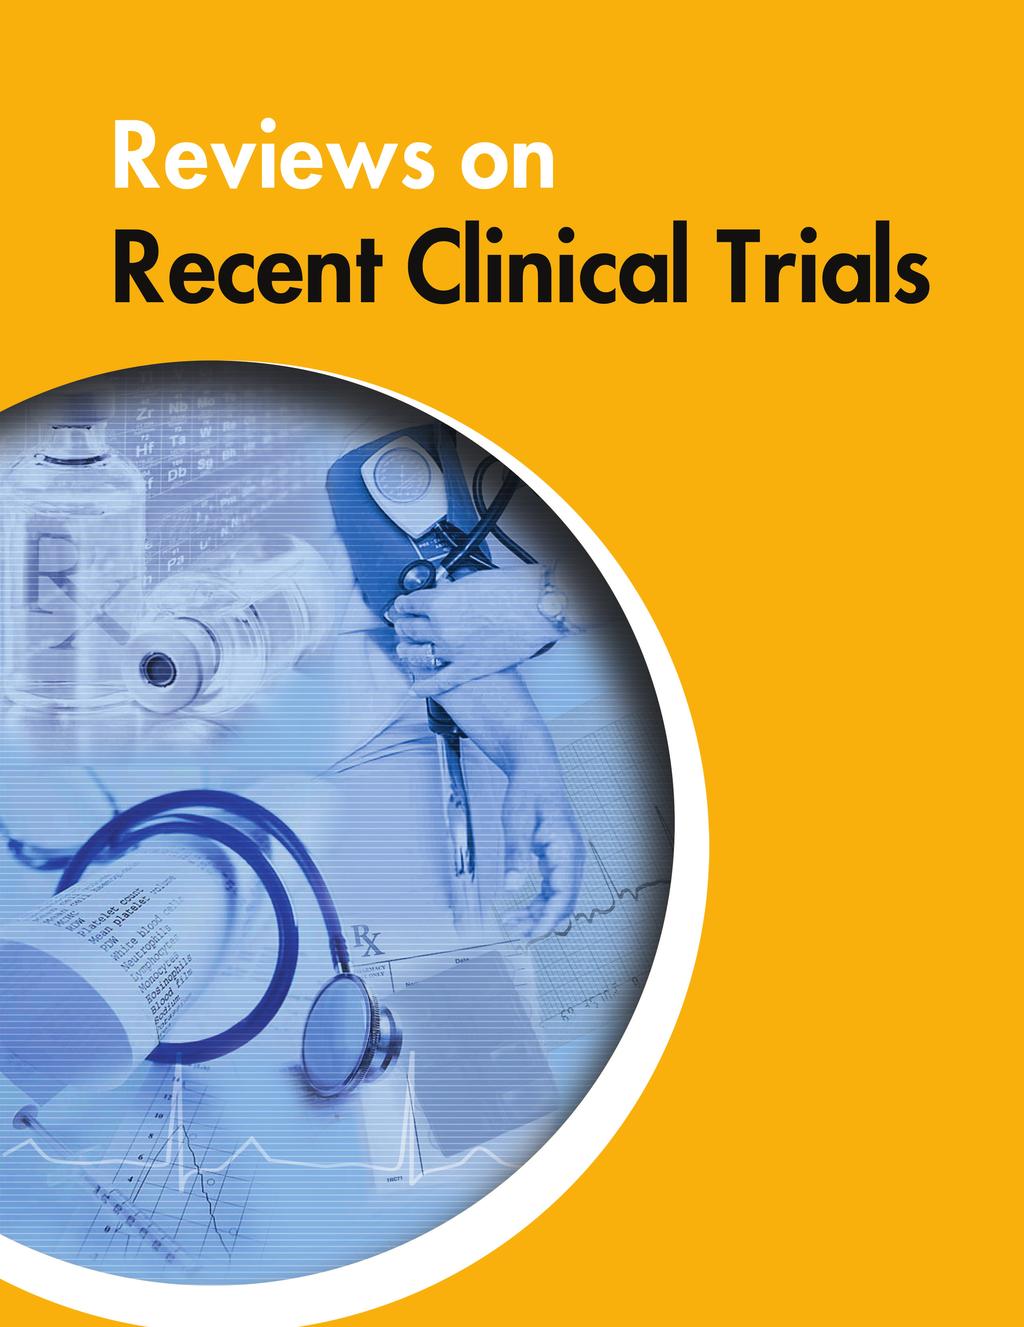 Reviews on Recent Clinical Trials Send Orders for Reprints to reprints@benthamscience.